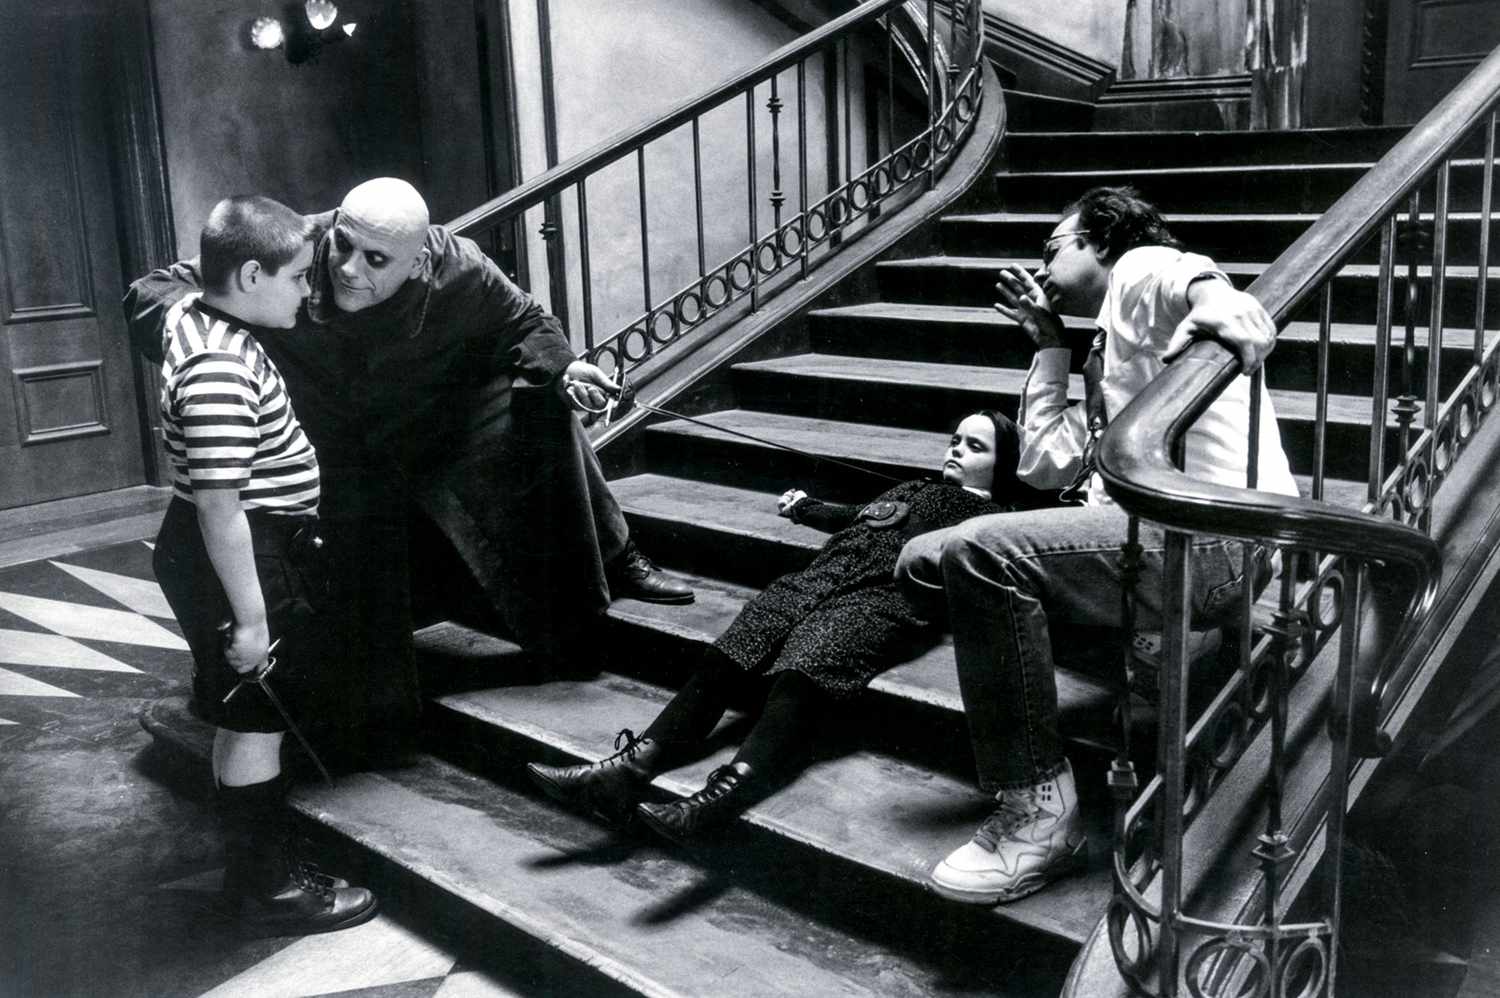 Barry Sonnenfeld reflects on directorial debut The Addams Family 